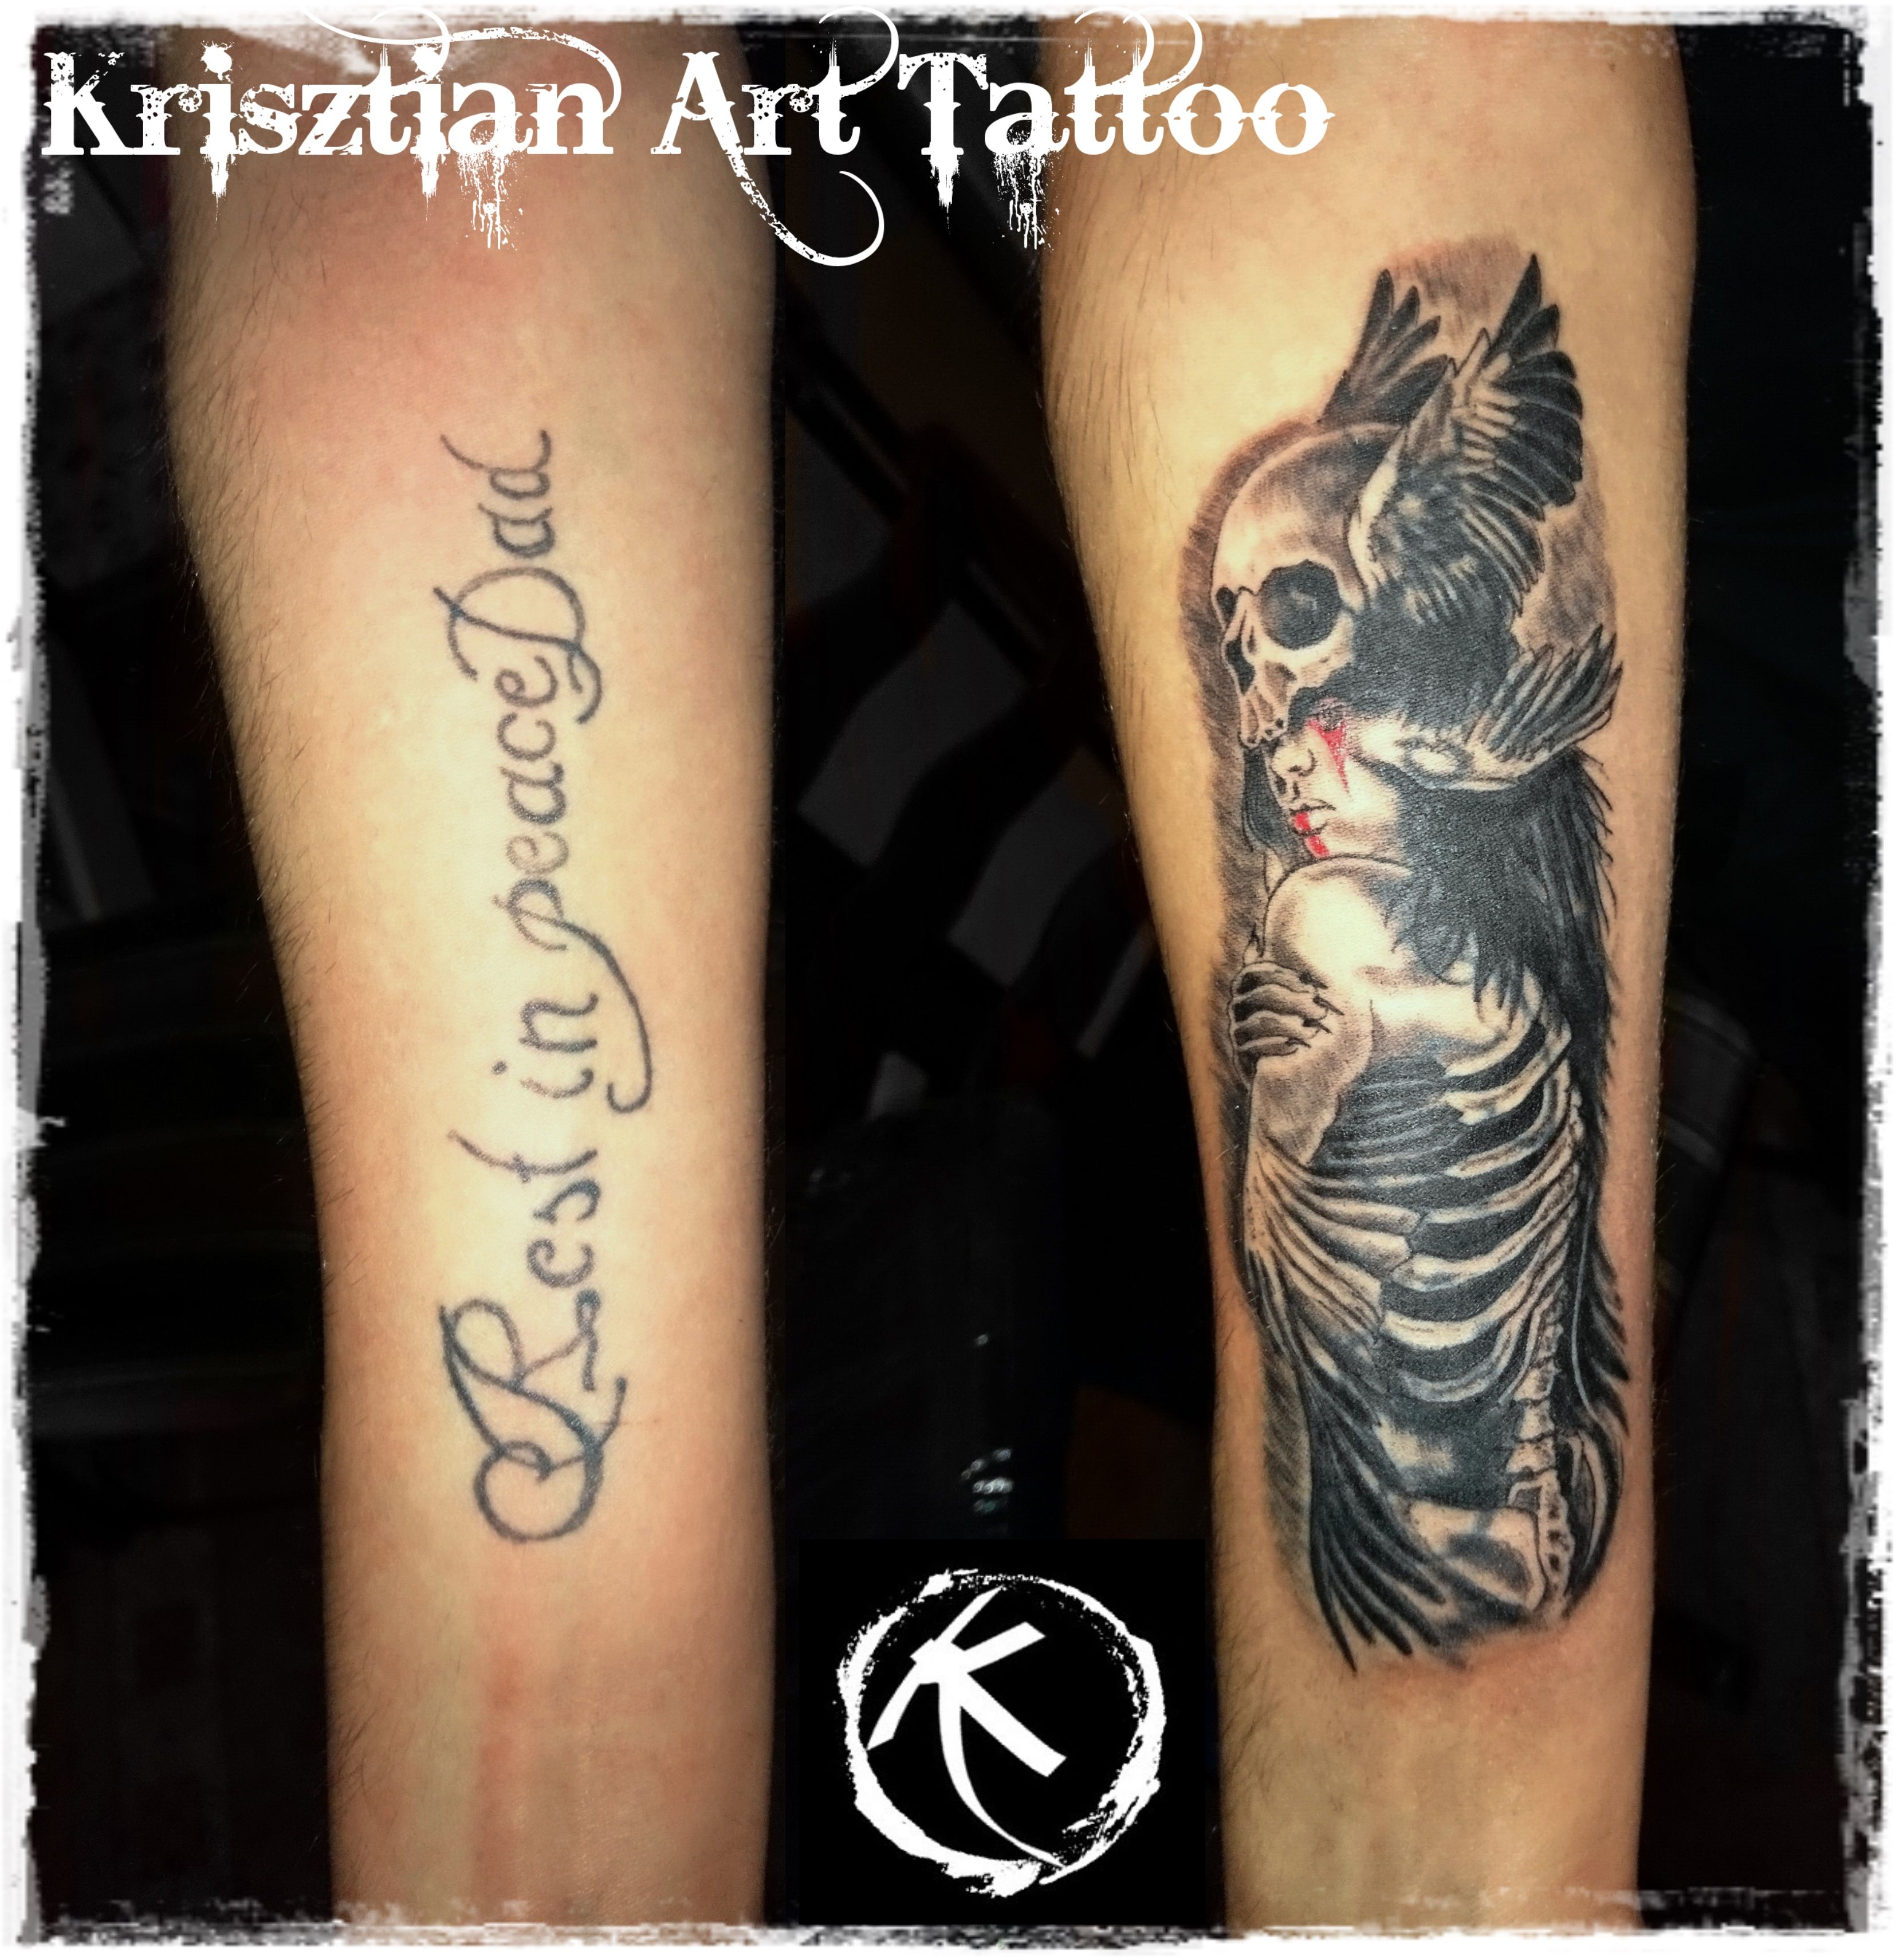 Krisztian Art Tattoo Cover Up Tattoo Forearm Skull And Girl pertaining to measurements 3322 X 3422